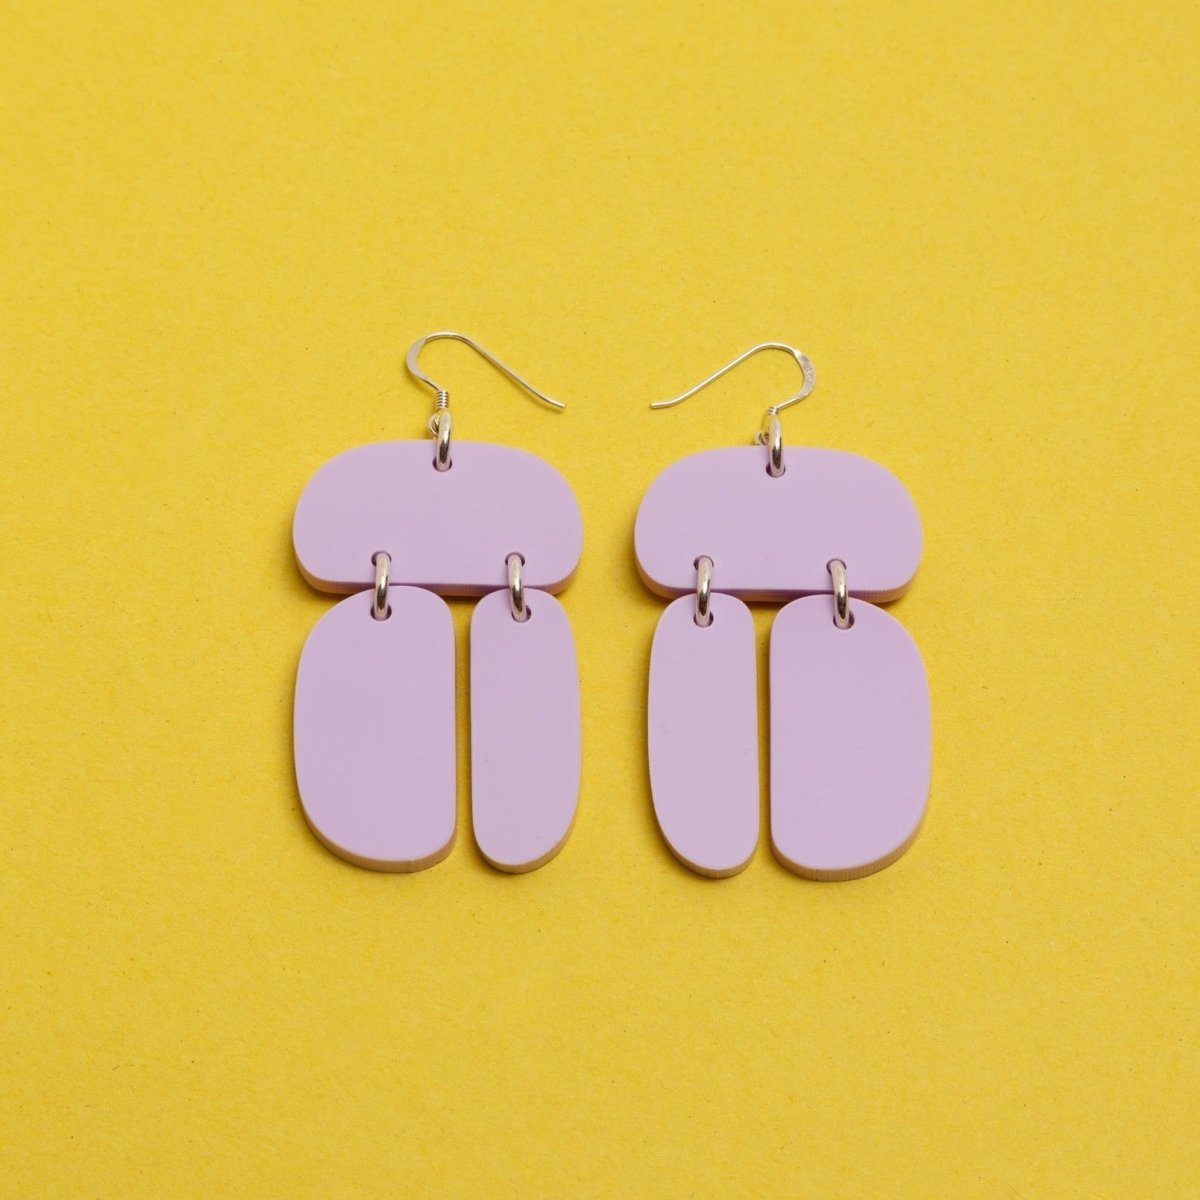 Three softly rounded lilac colored ovoids come together with sterling silver rings and sterling silver ear wires. The Ovoid Trio Earrings in Opaque Lilac are designed and handcrafted  by Warren Steven Scott in Canada.